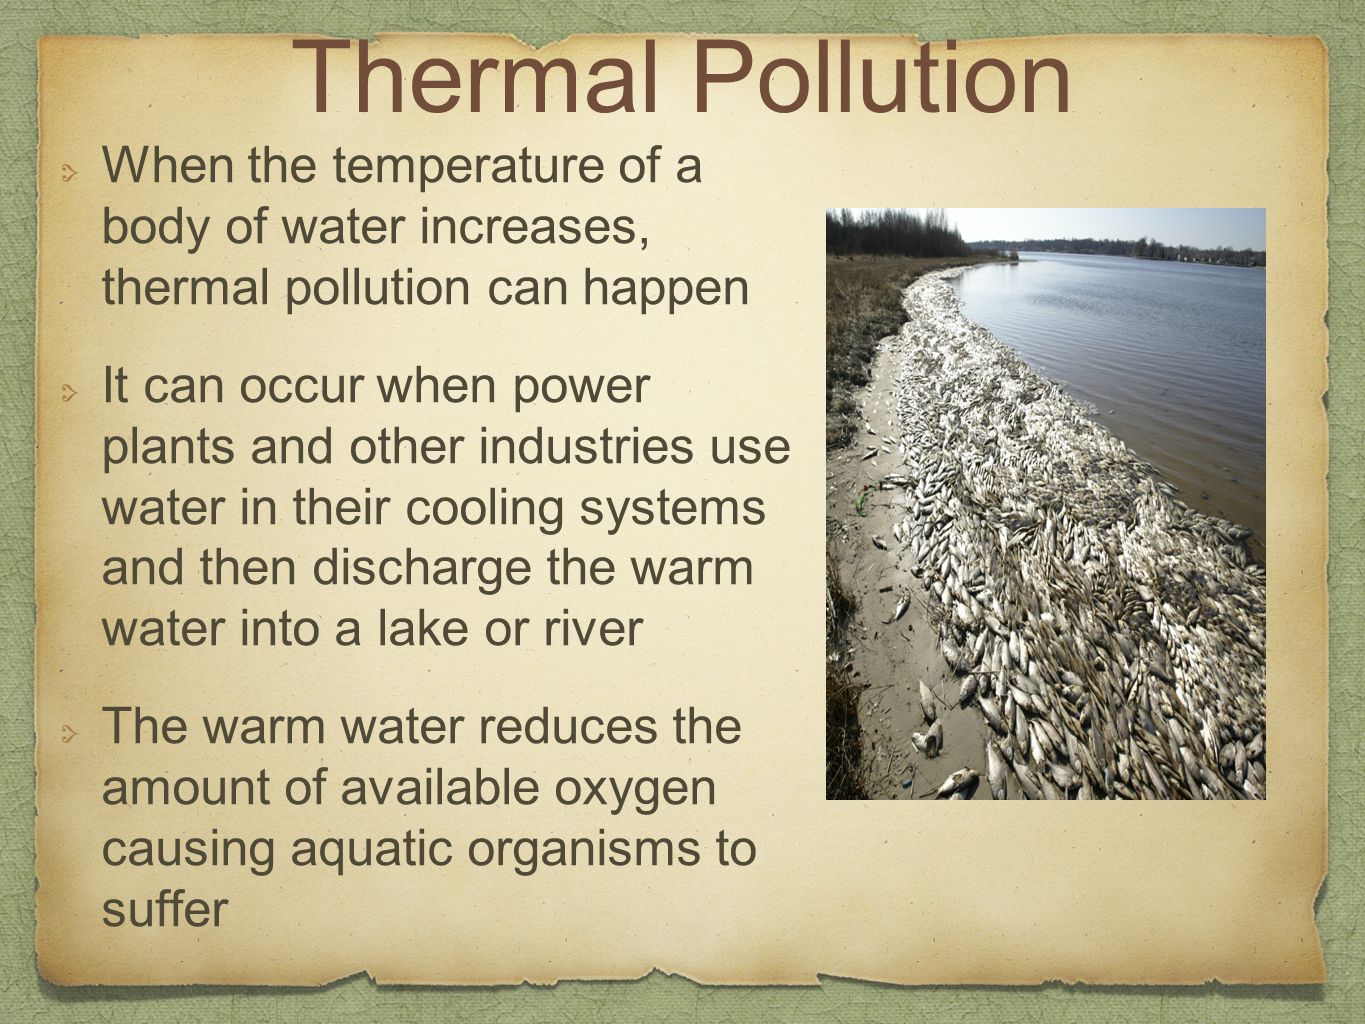 Thermal Pollution When the temperature of a body of water increases, thermal pollution can happen.